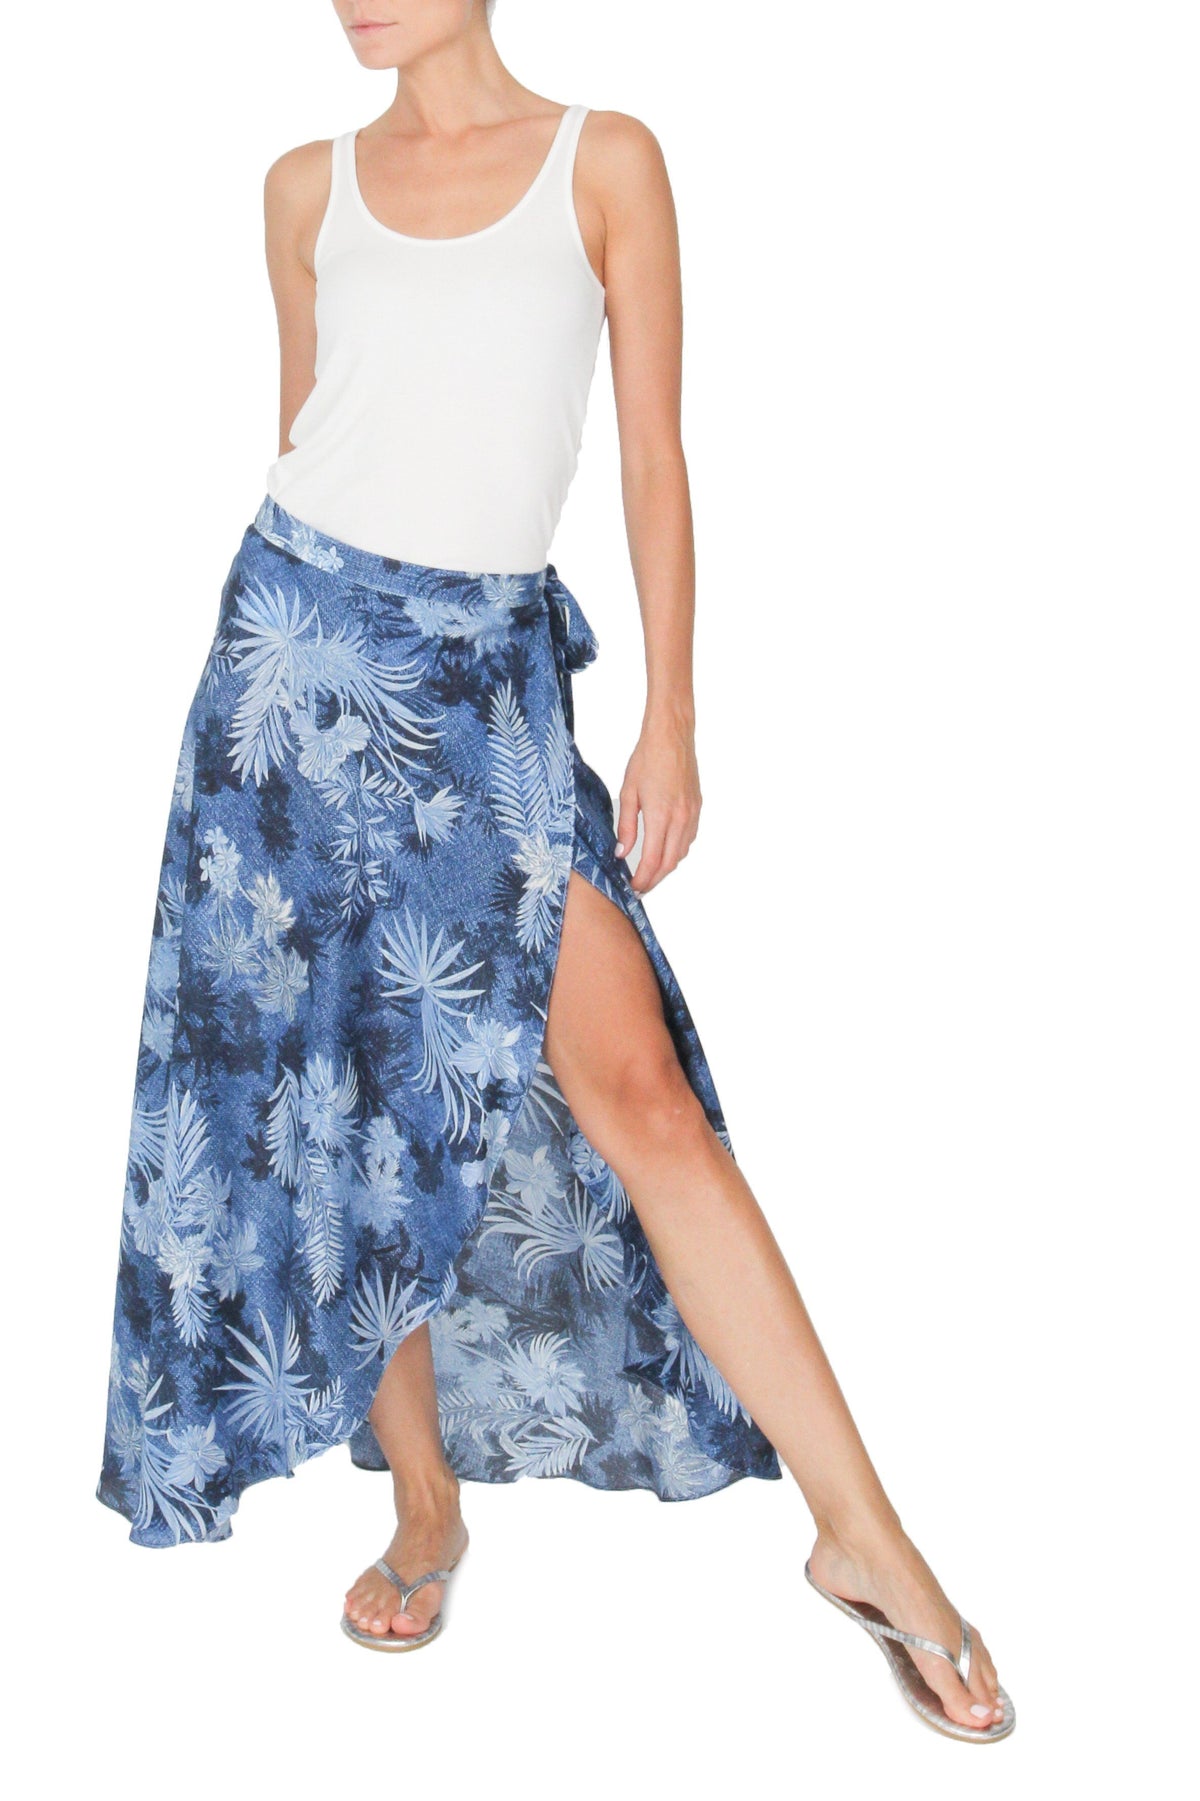 Wrapped Satin Skirt Marie France Van Damme 0 Blue Palm 